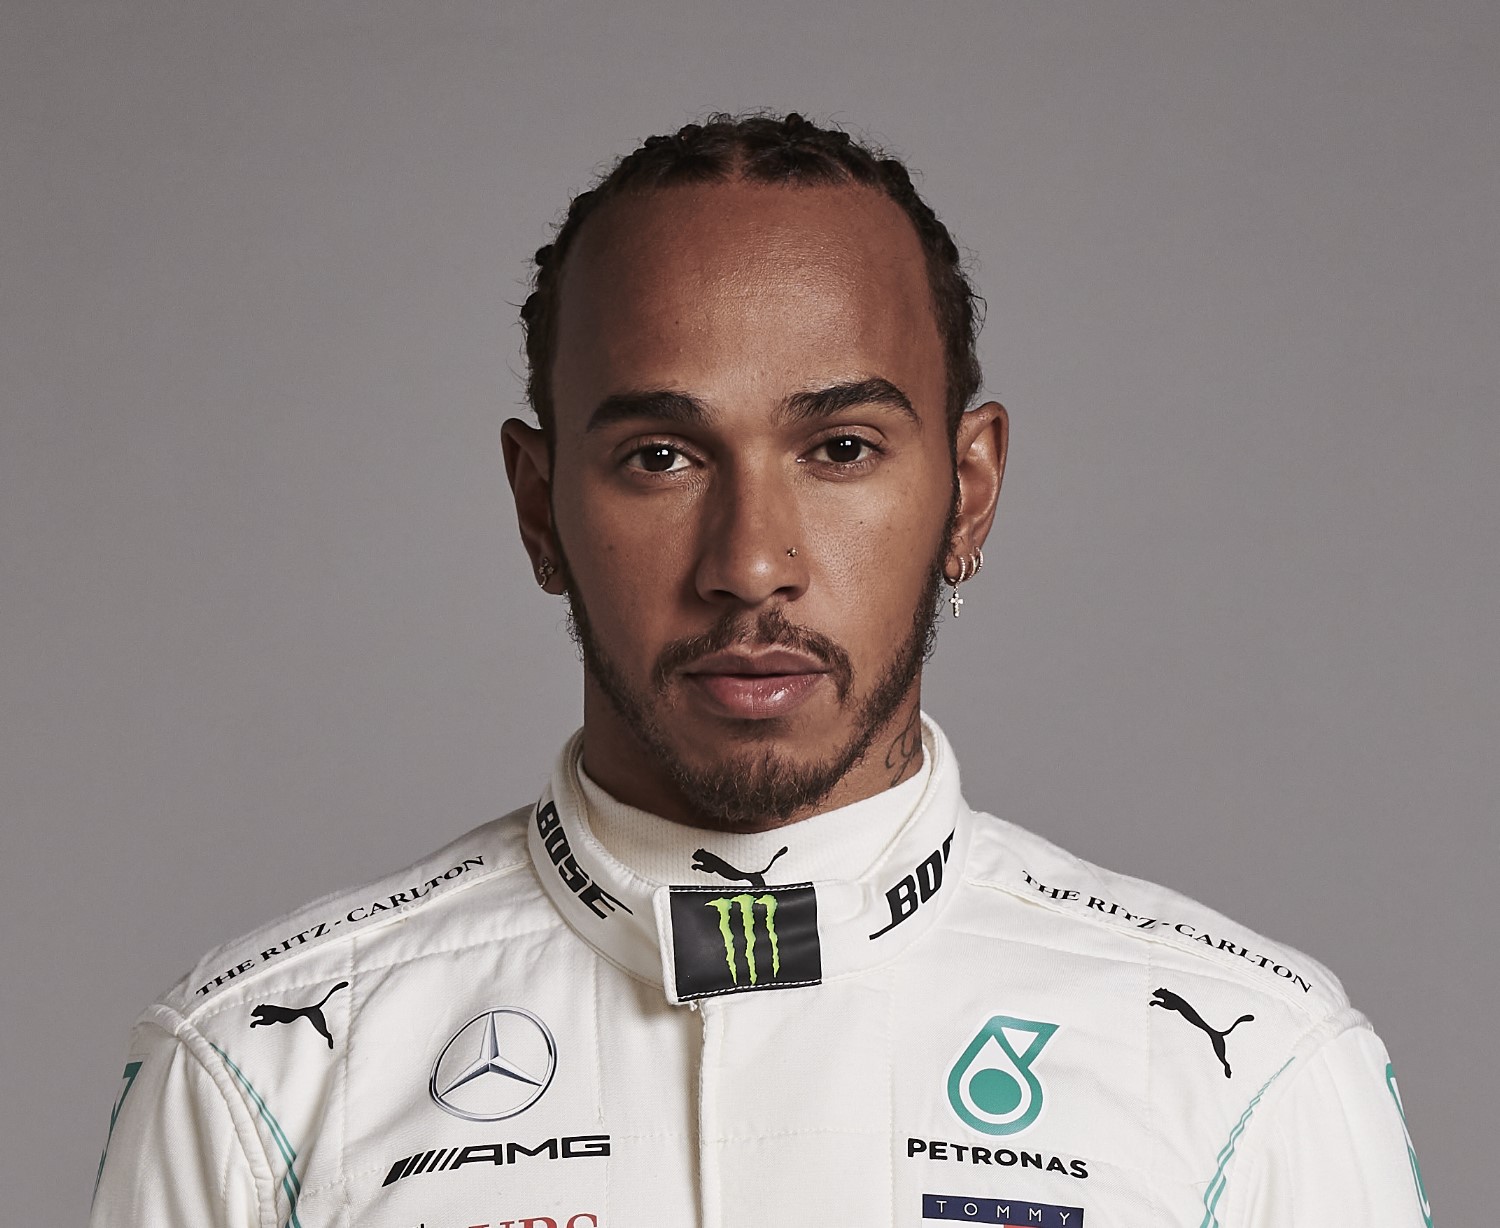 If Mercedes was cheating since 2018 should Hamilton be stripped of his last two titles?